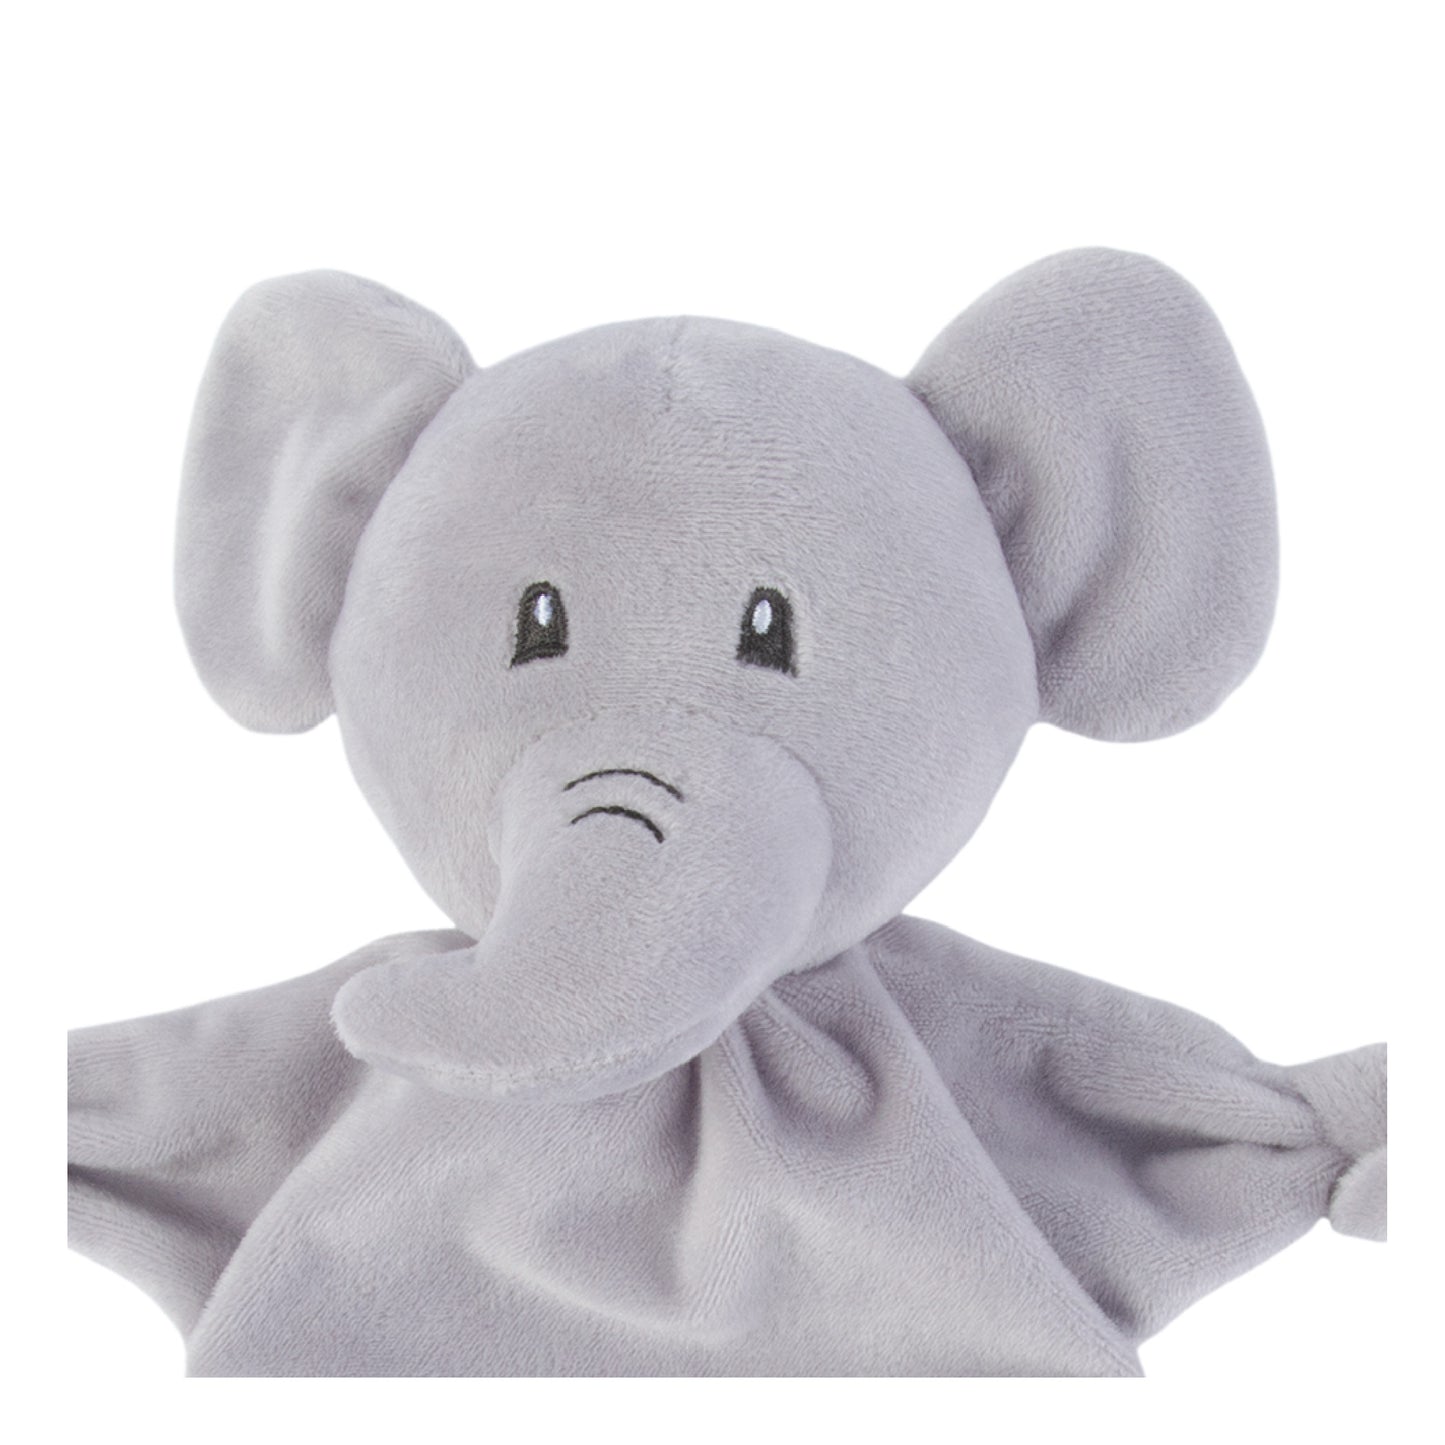  Elephant Security Blanket- face view